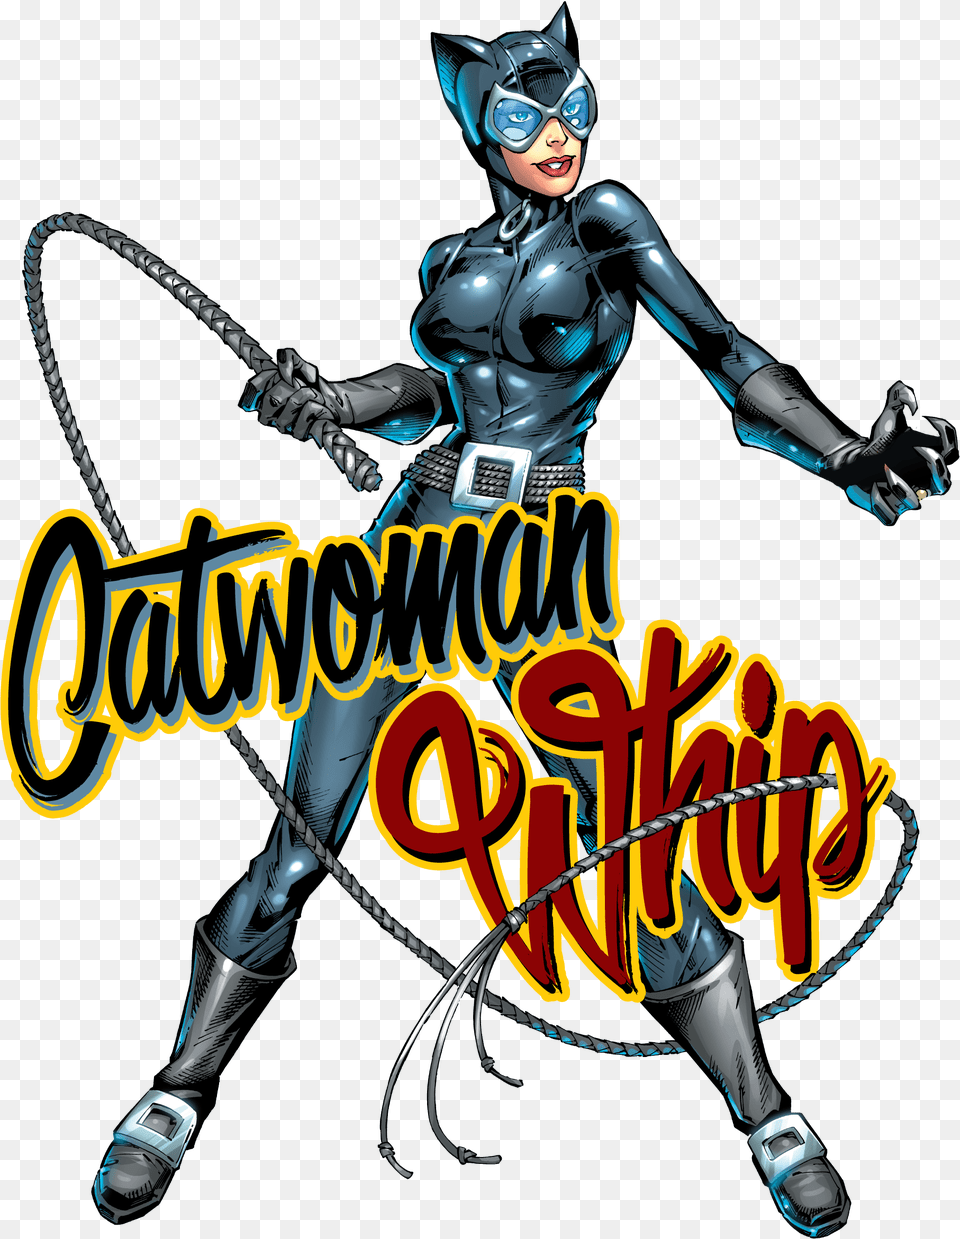 Photos Of Six Flags Over Texas Catwoman Whip, Adult, Female, Person, Woman Png